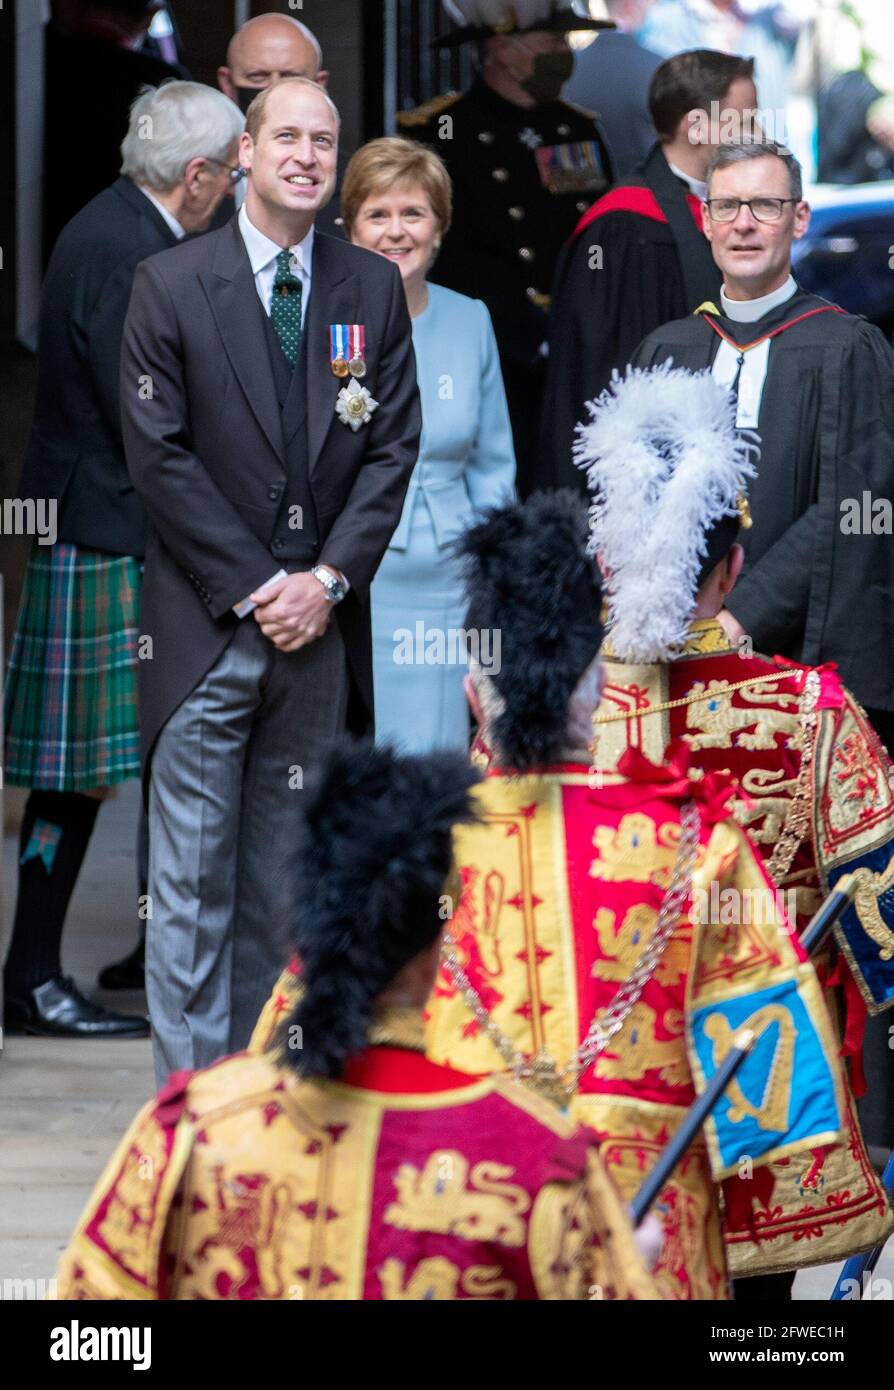 The Duke of Cambridge arrives for the opening ceremony of the General  Assembly of the Church of Scotland and to give a speech in his role as the  Lord High Commissioner to